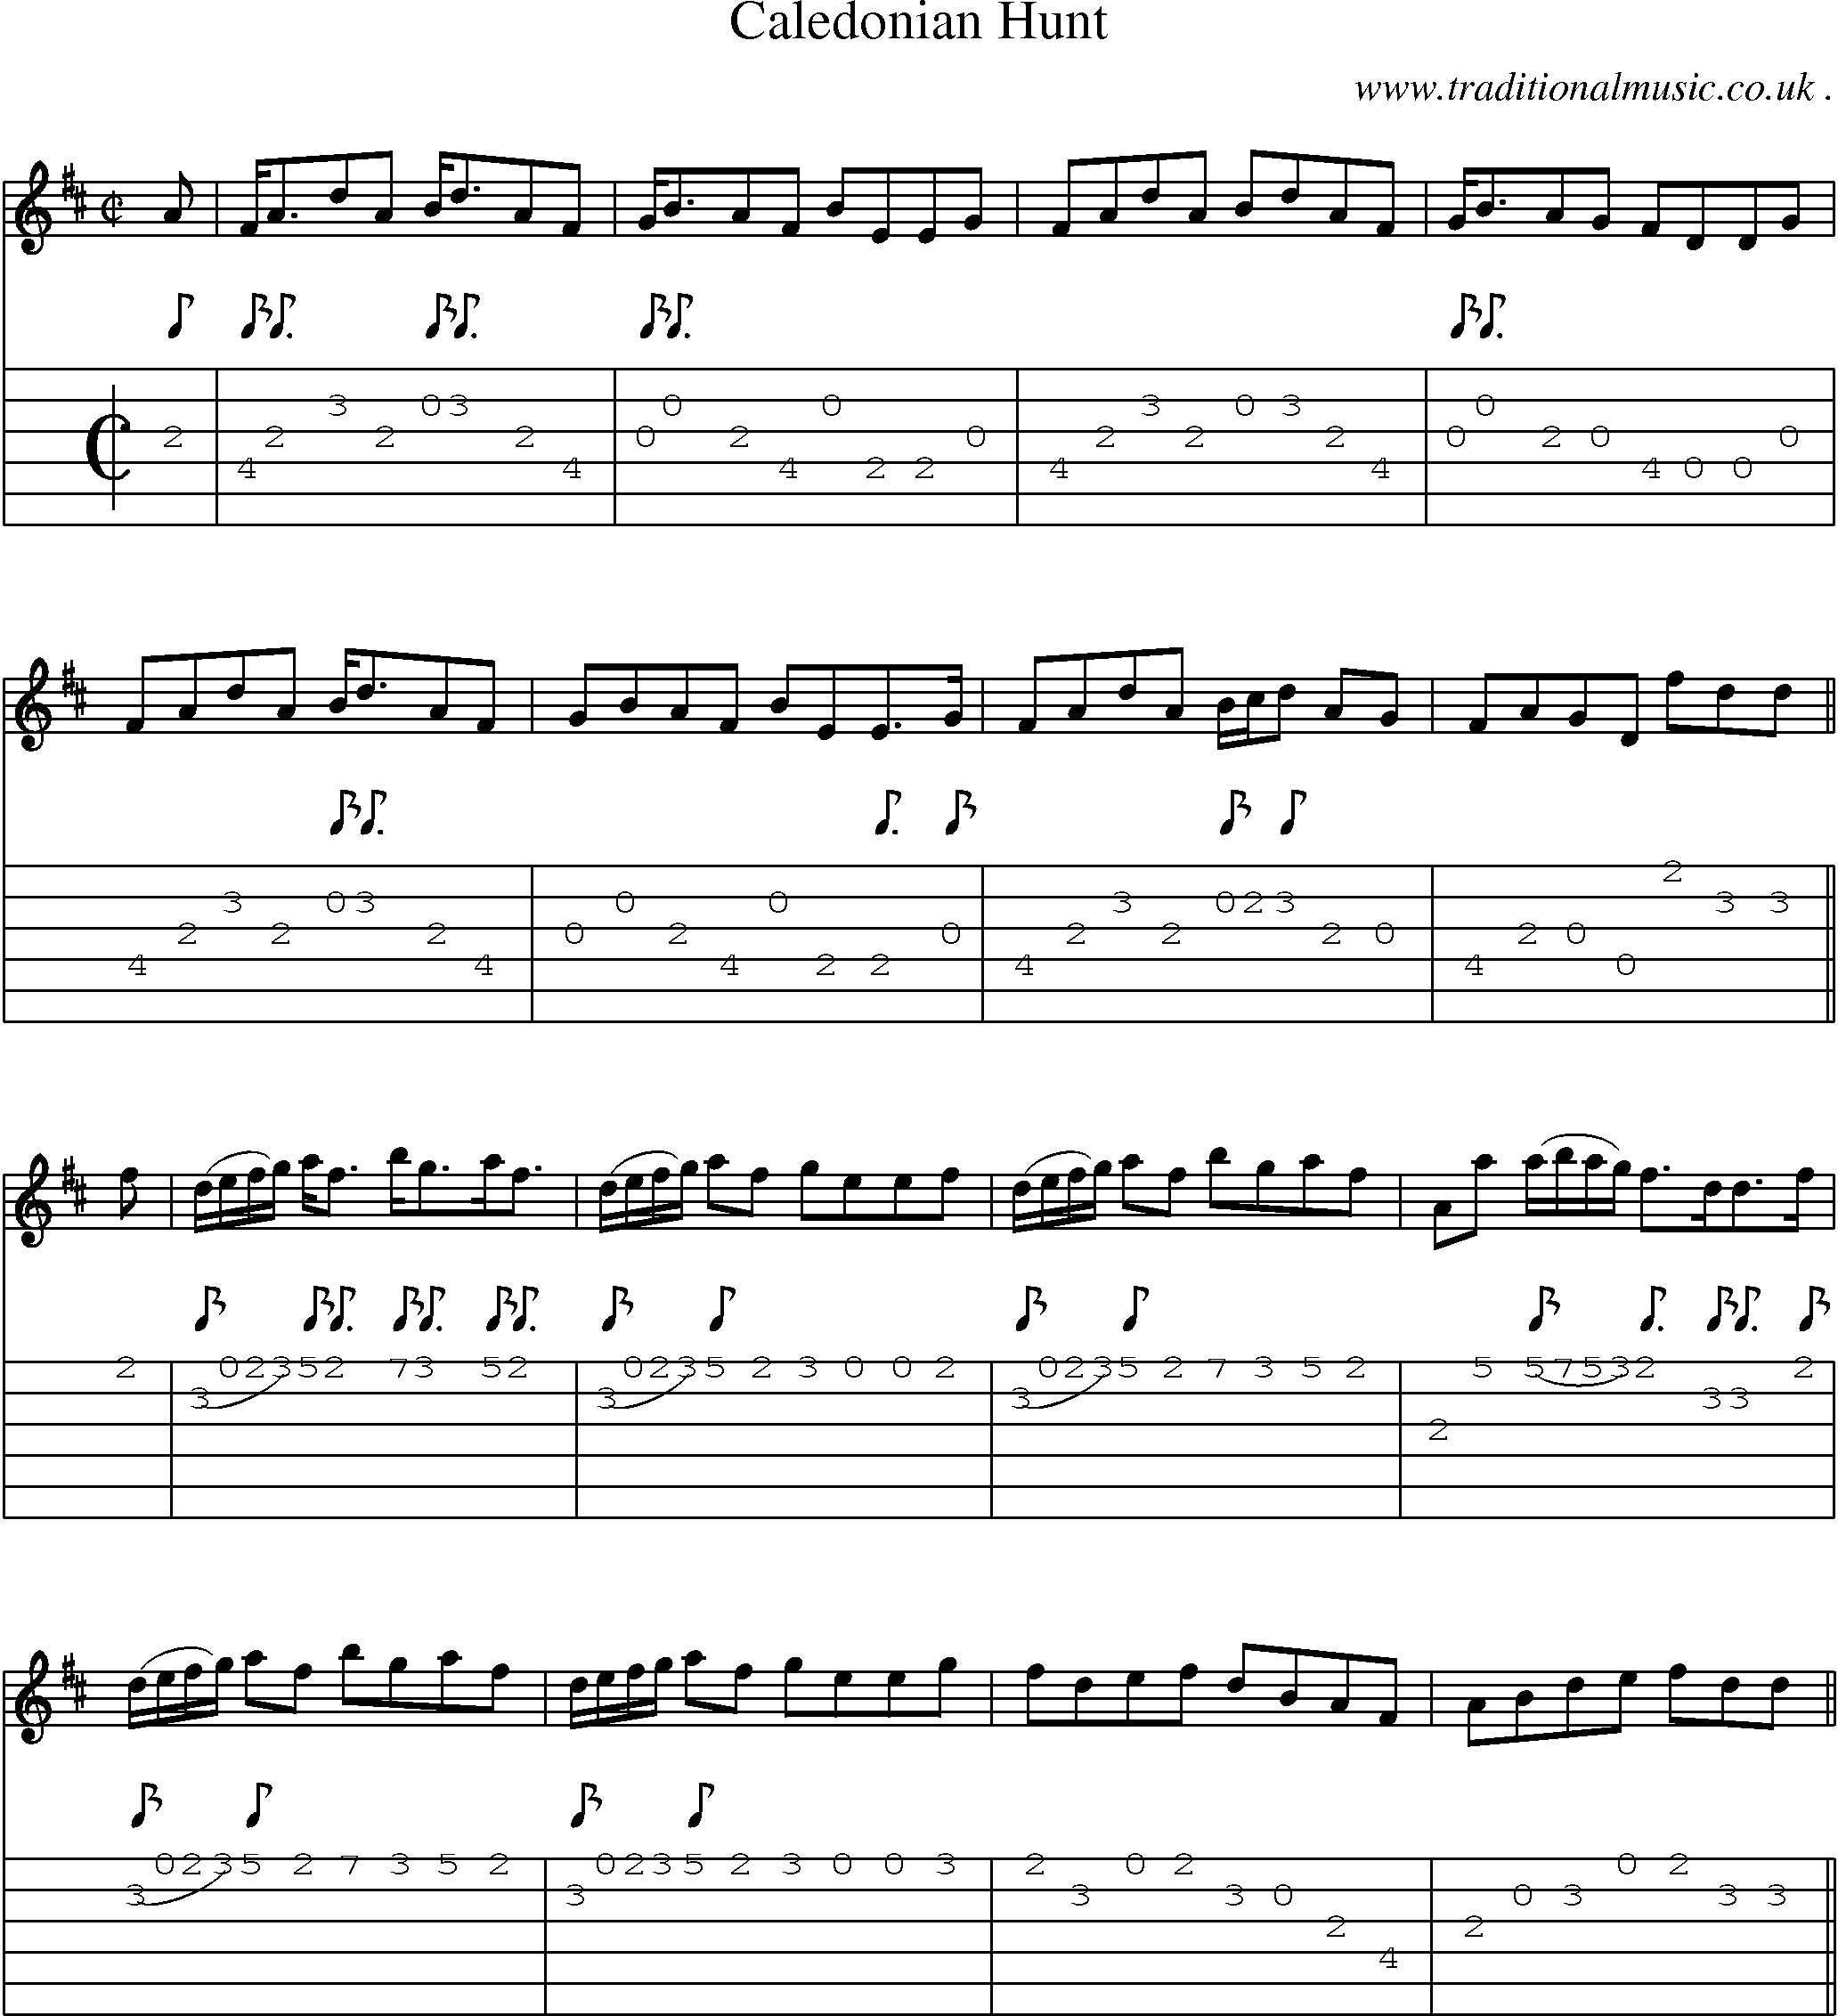 Sheet-Music and Guitar Tabs for Caledonian Hunt